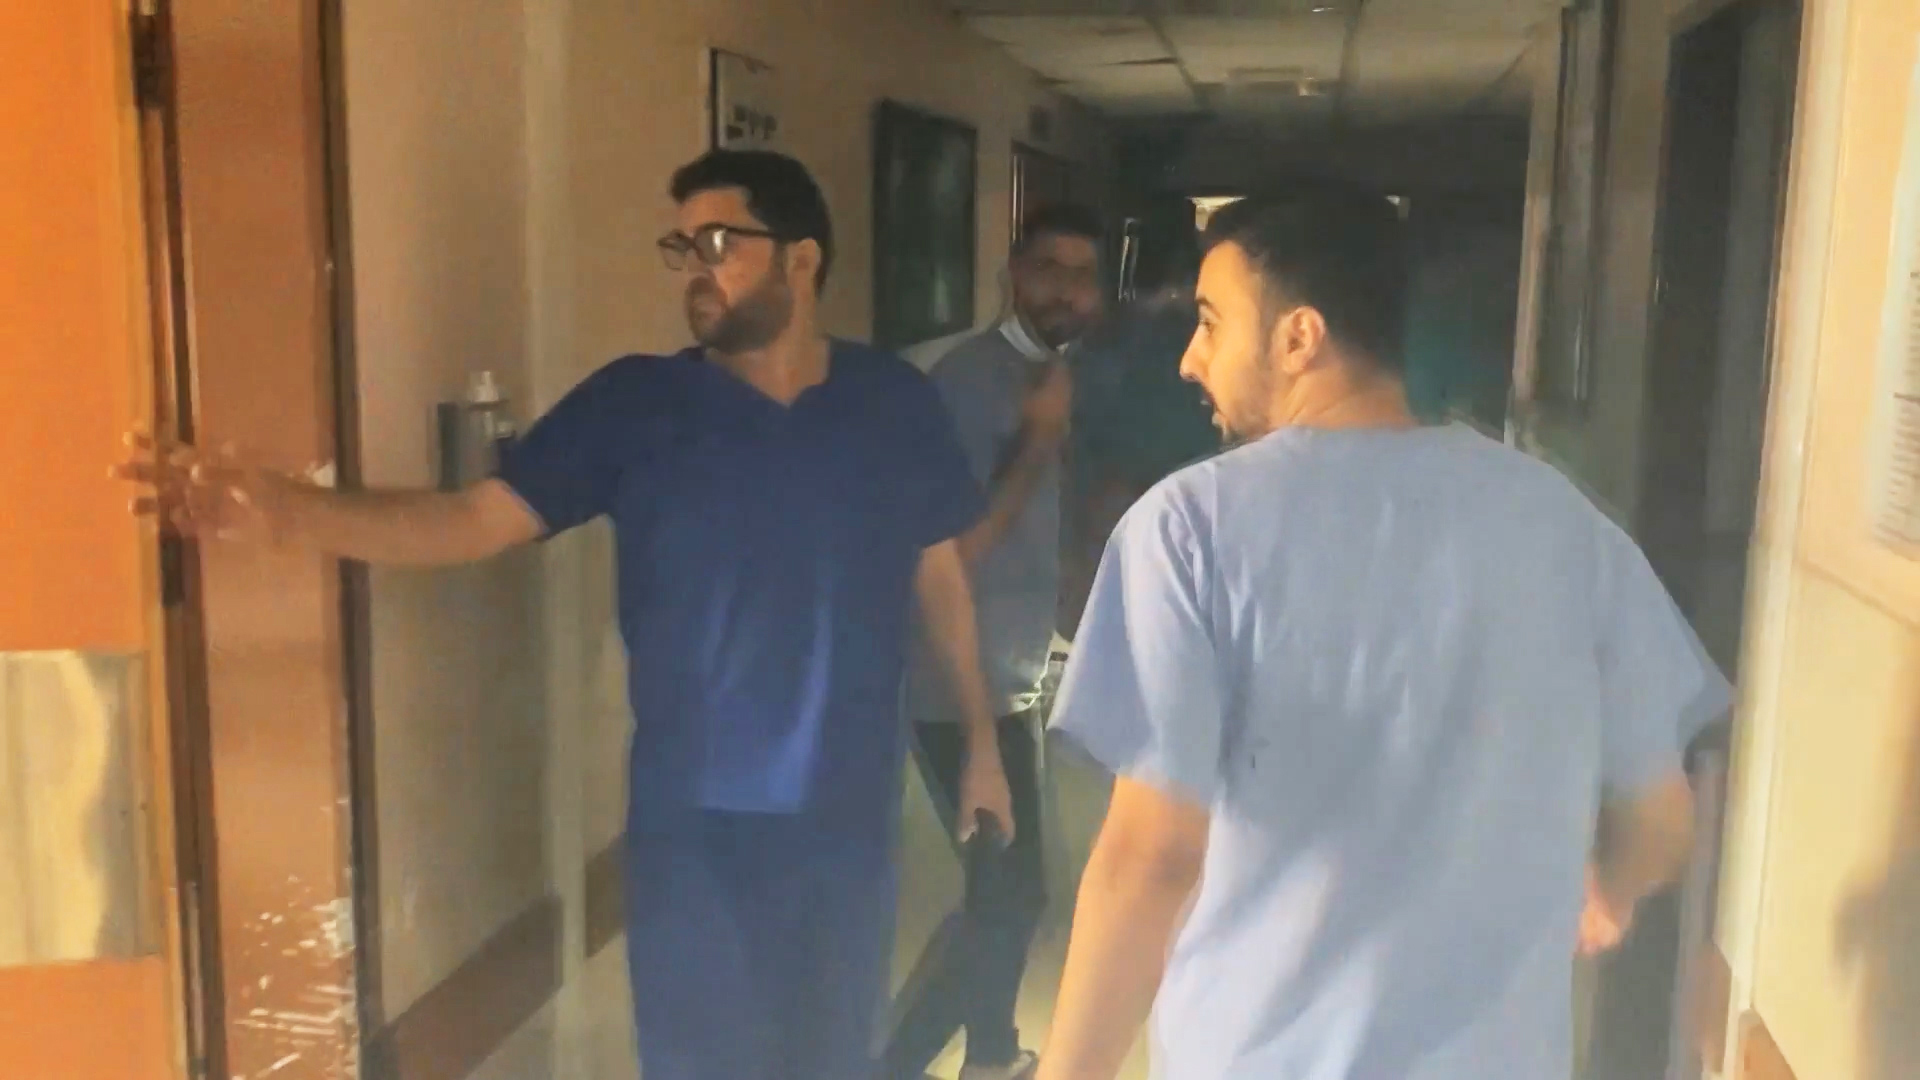 Israeli forces stormed the Al-Shifa hospital complex Wednesday morning in Gaza as part of a military operation against Hamas.